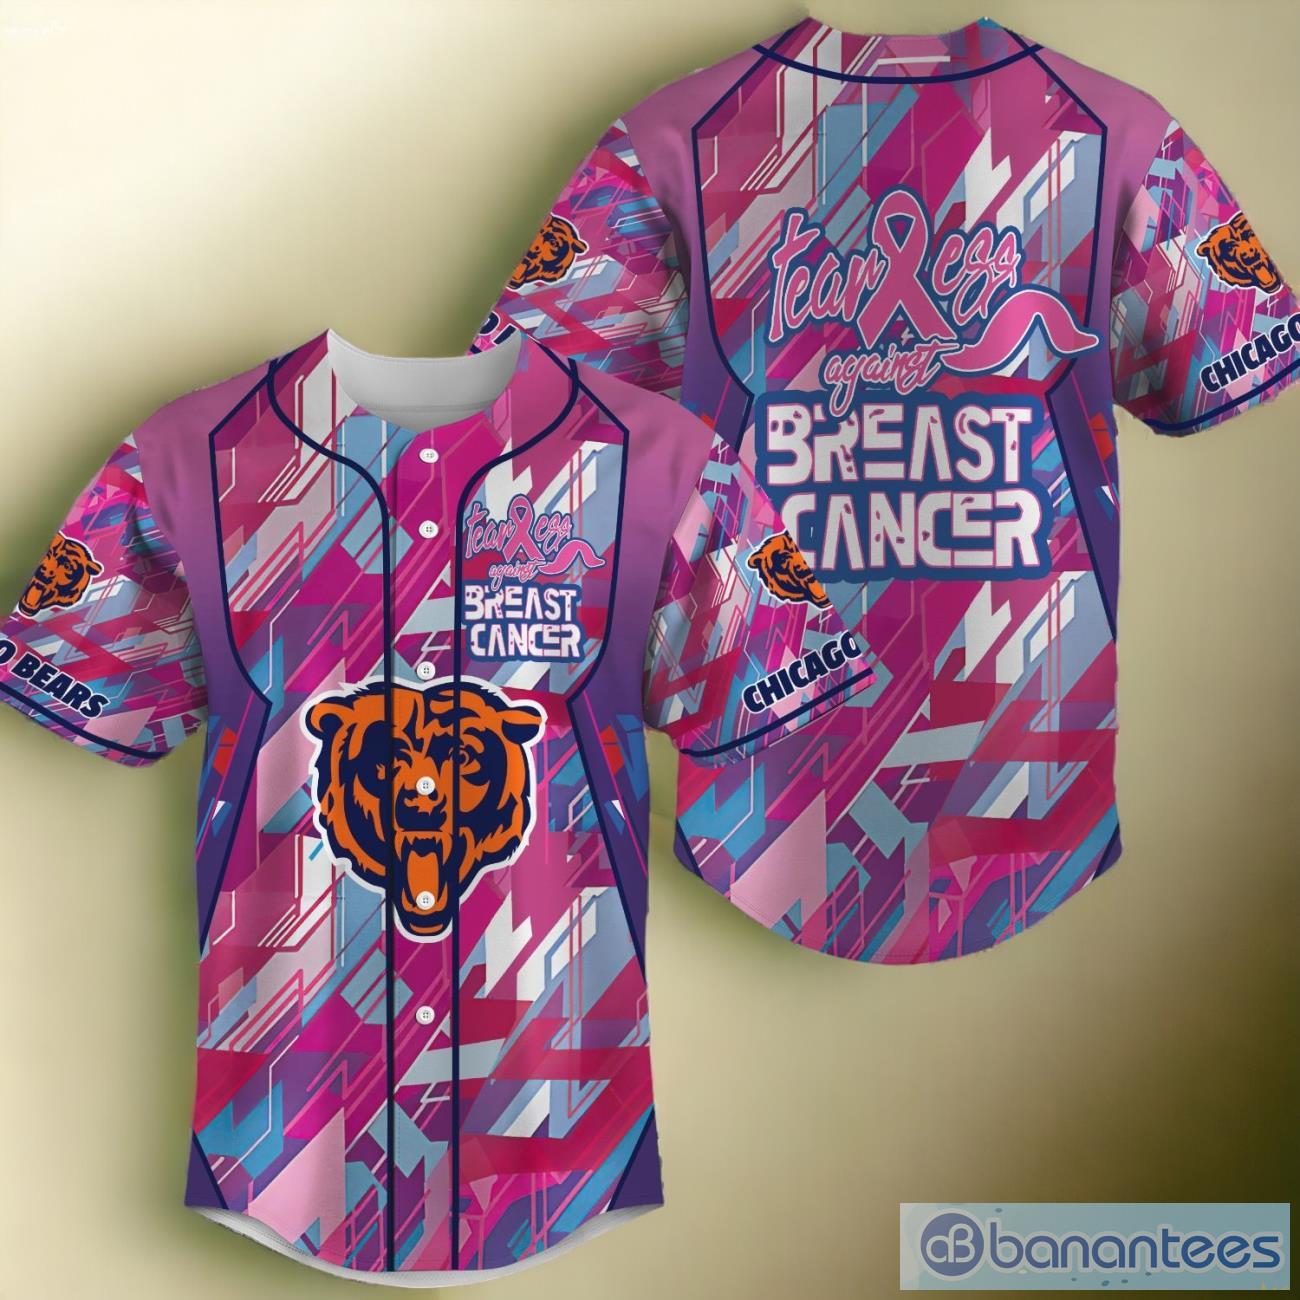 https://image.banantees.com/2024/01/nfl-chicago-bears-pink-can-fearless-again-breast-cancer-baseball-jersey.jpg